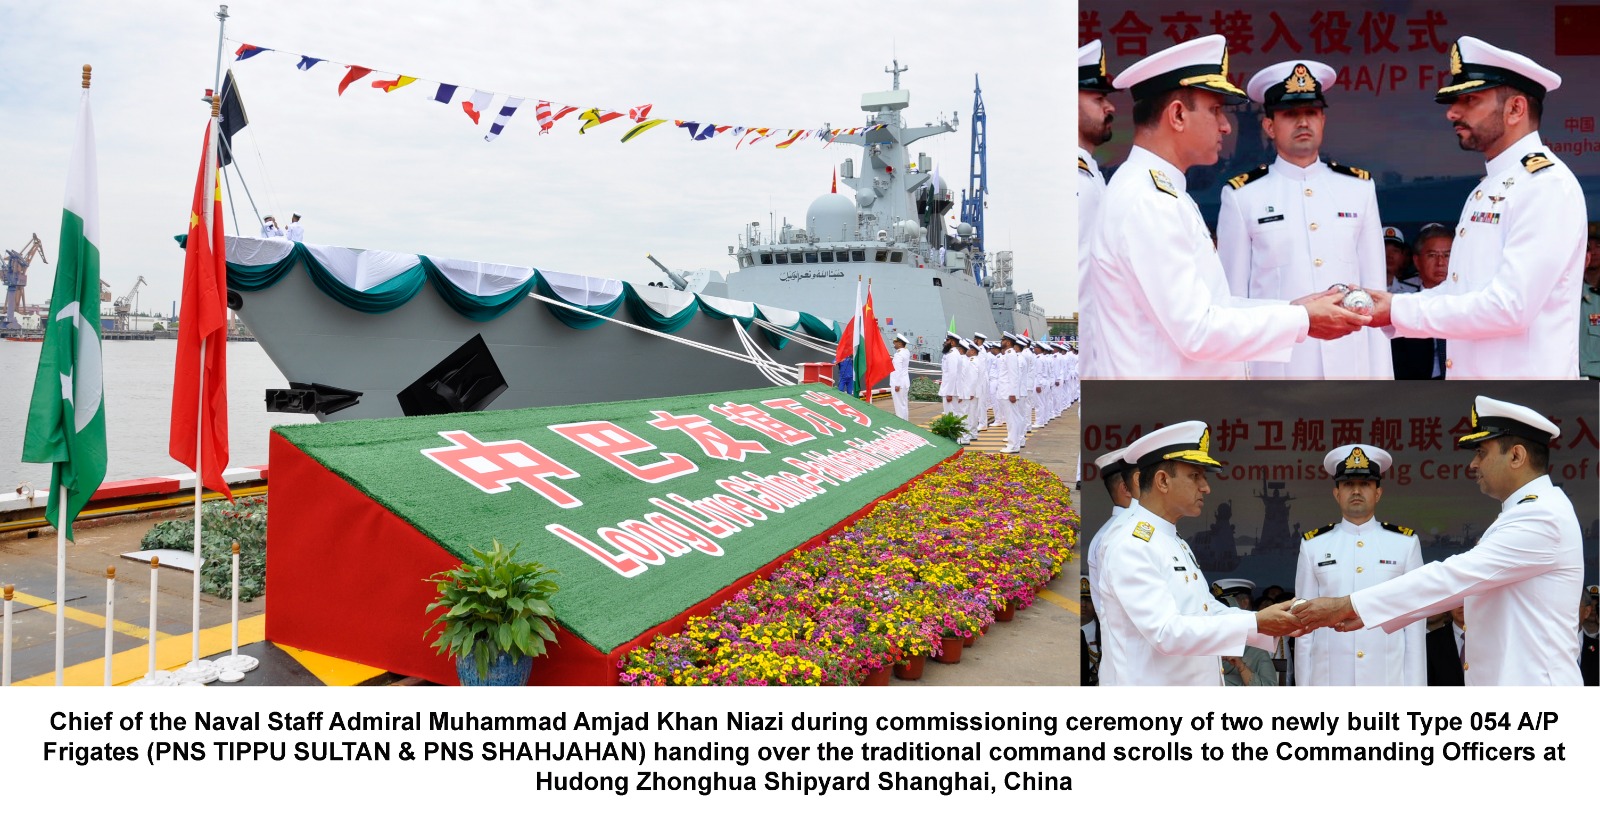 COMMISSIONING CEREMONY OF ADVANCED FRIGATES FOR PAKISTAN NAVY HELD AT CHINA